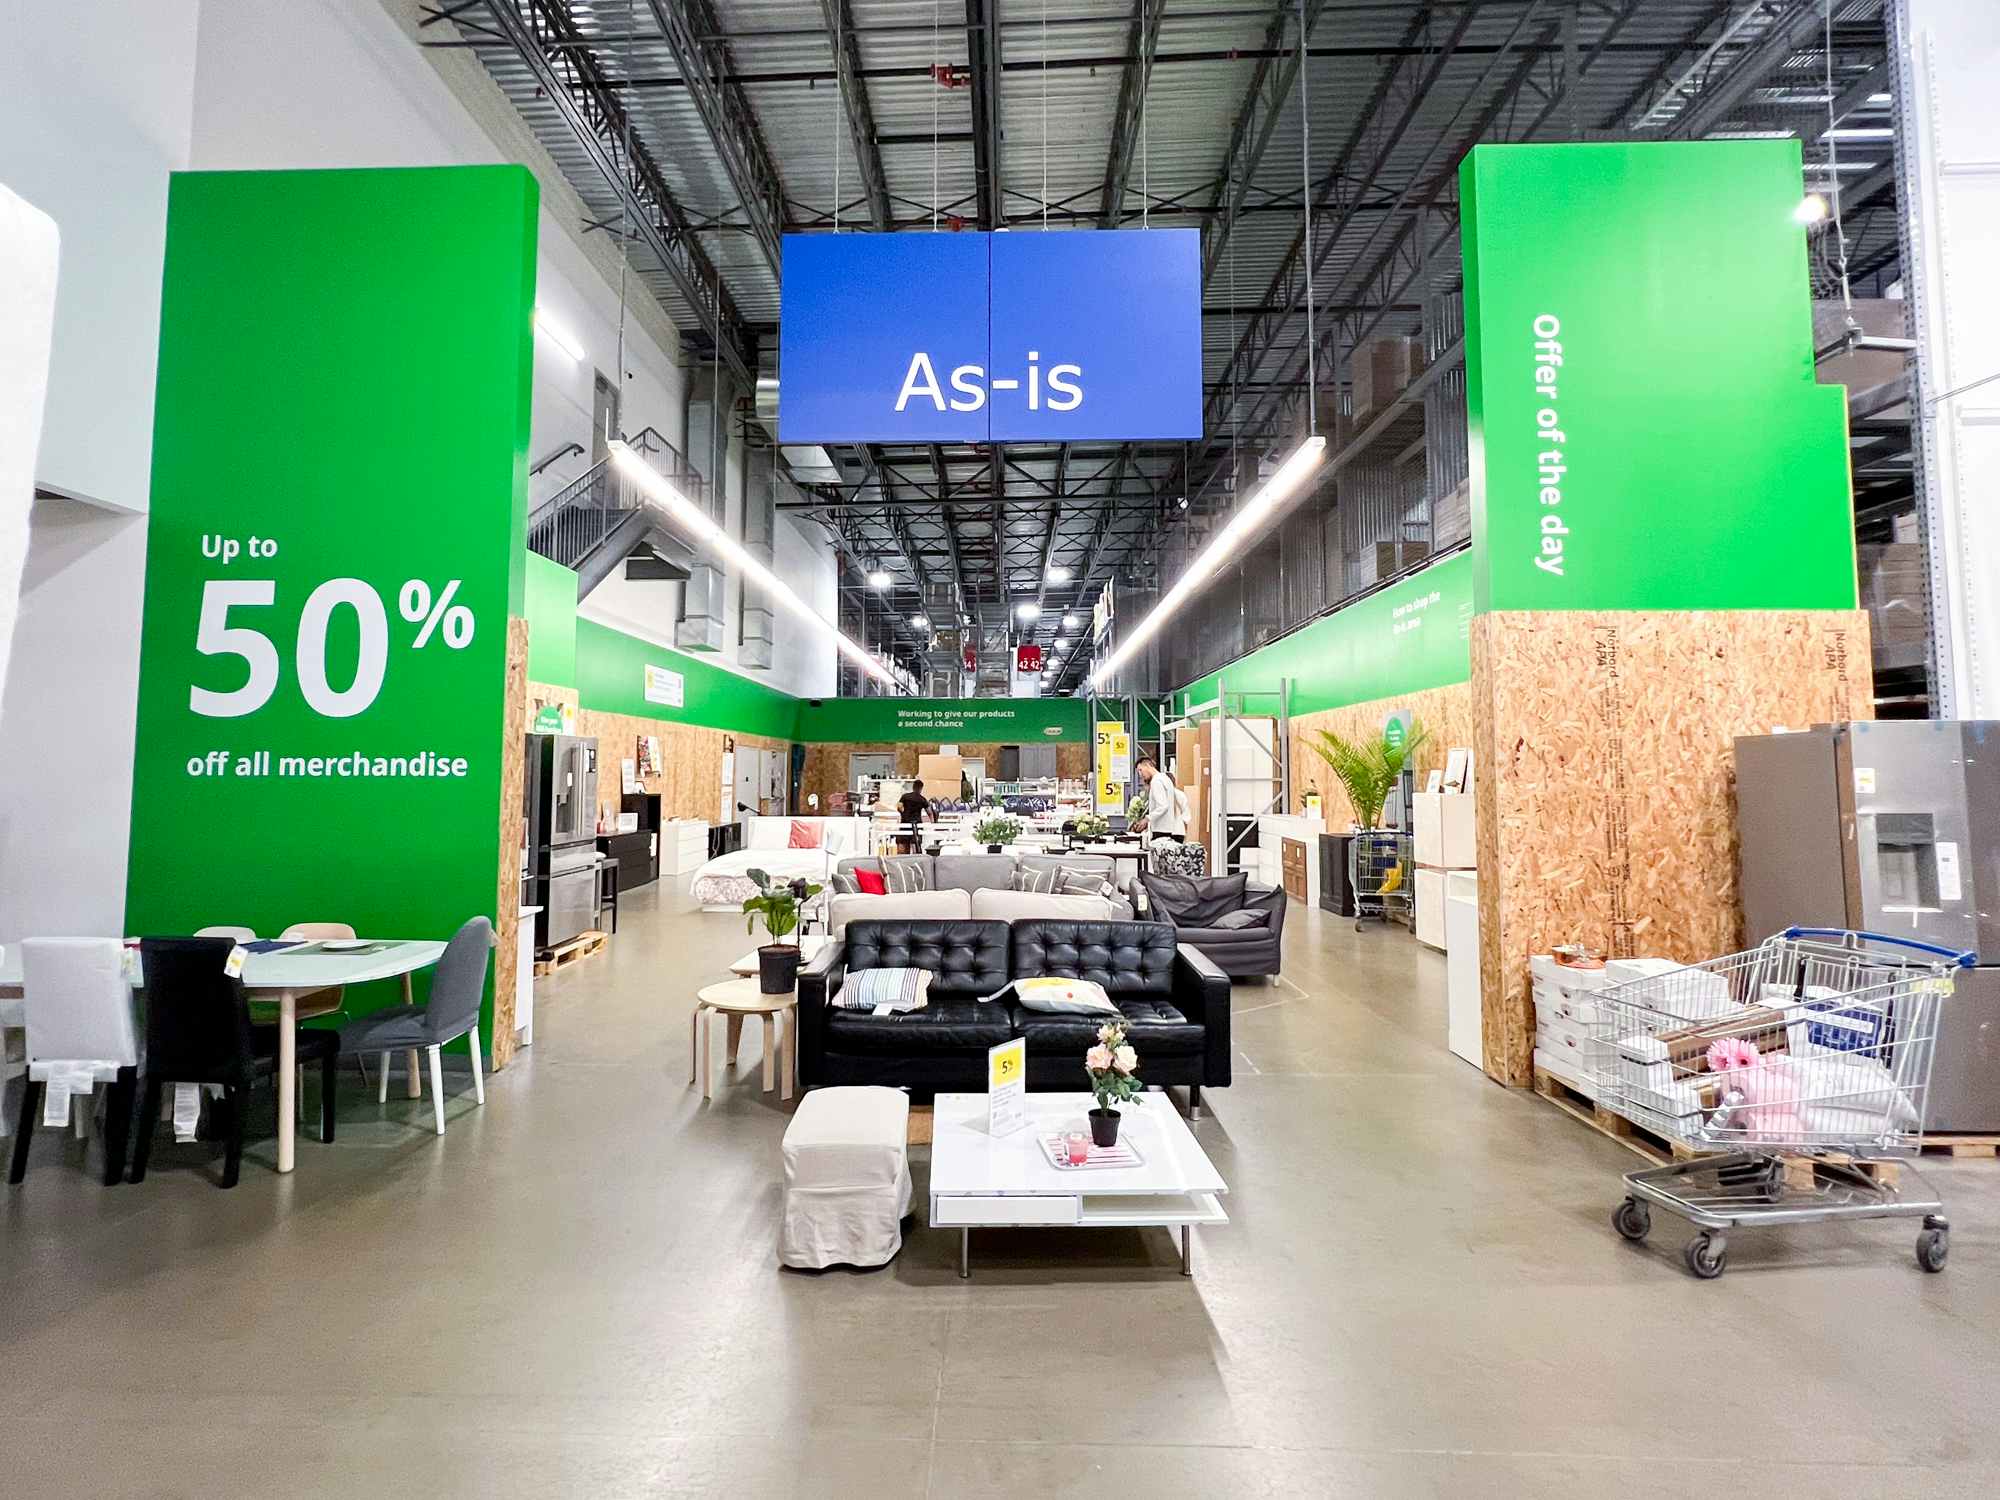 the As-Is area of items at Ikea